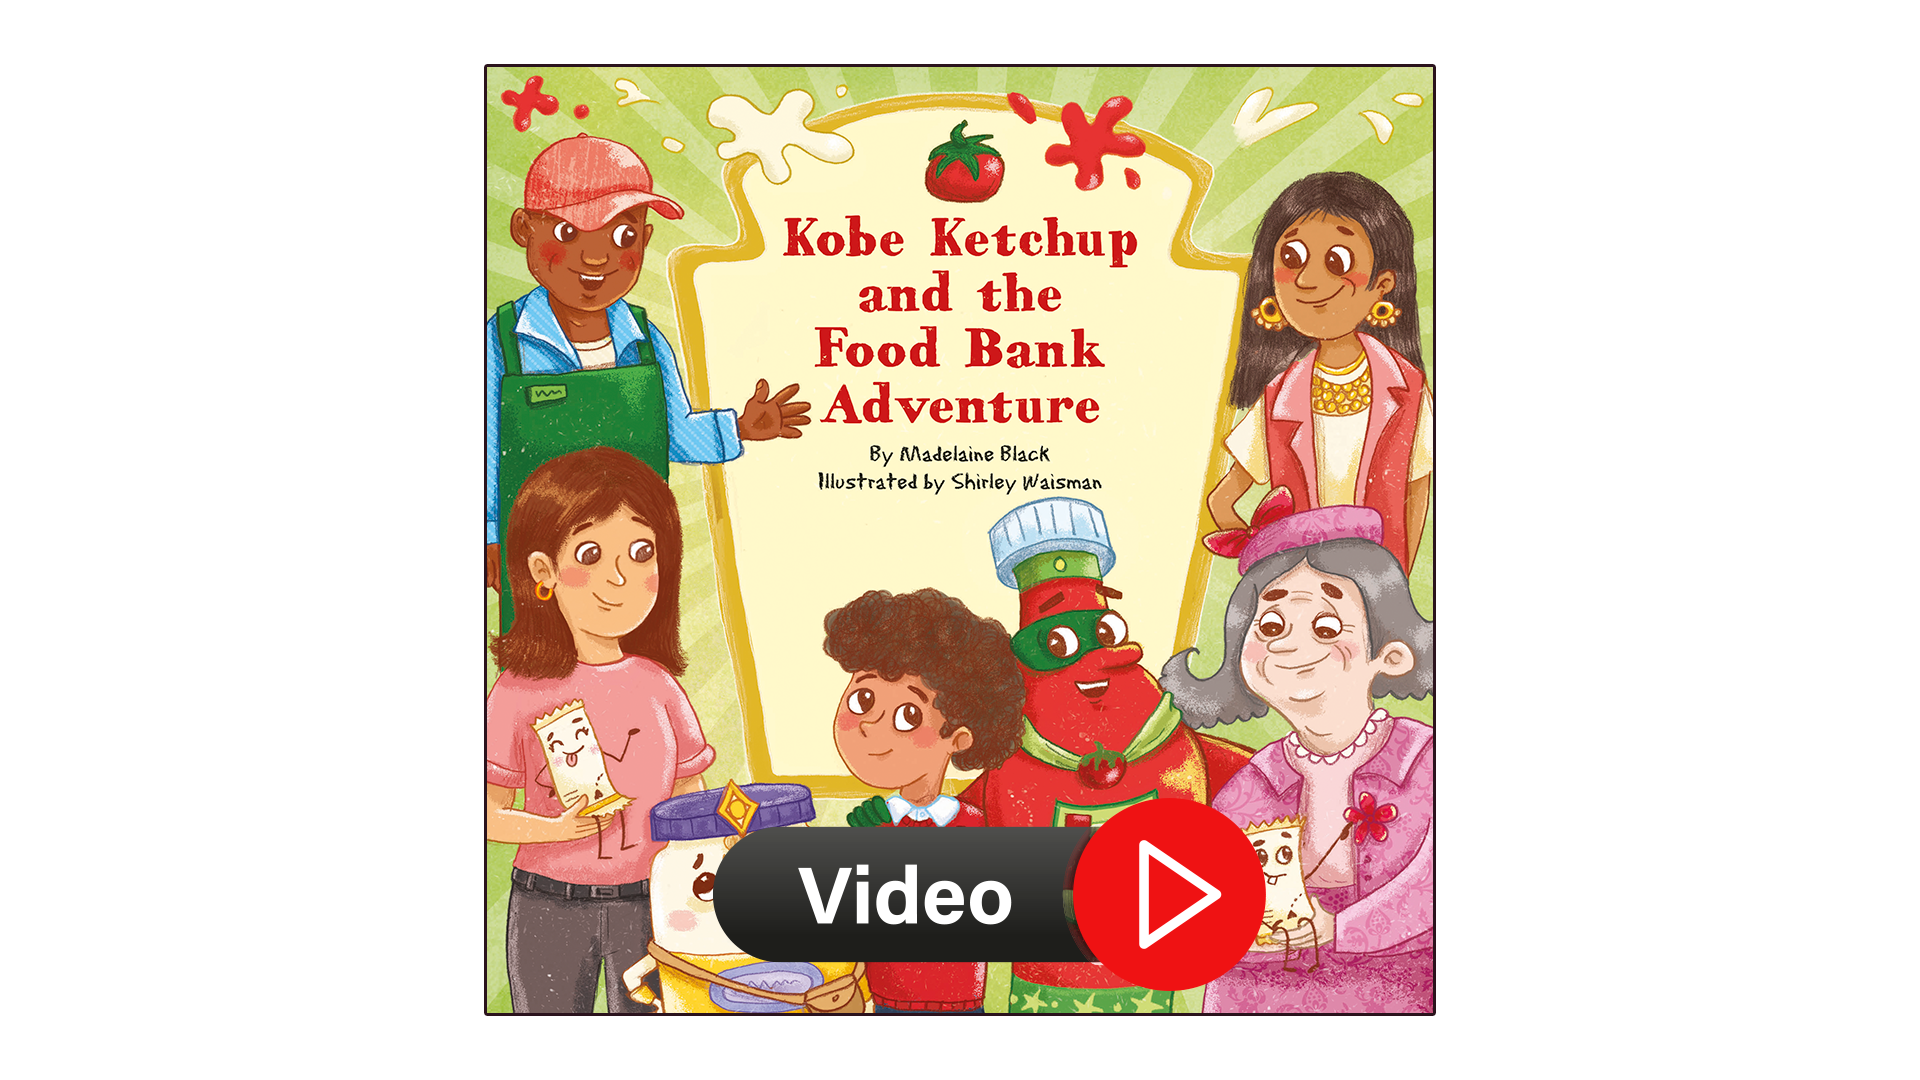 Load video: Video of Madelaine Black reading her book &#39;Kobe Ketchup and the Food Bank Adventure&#39;.